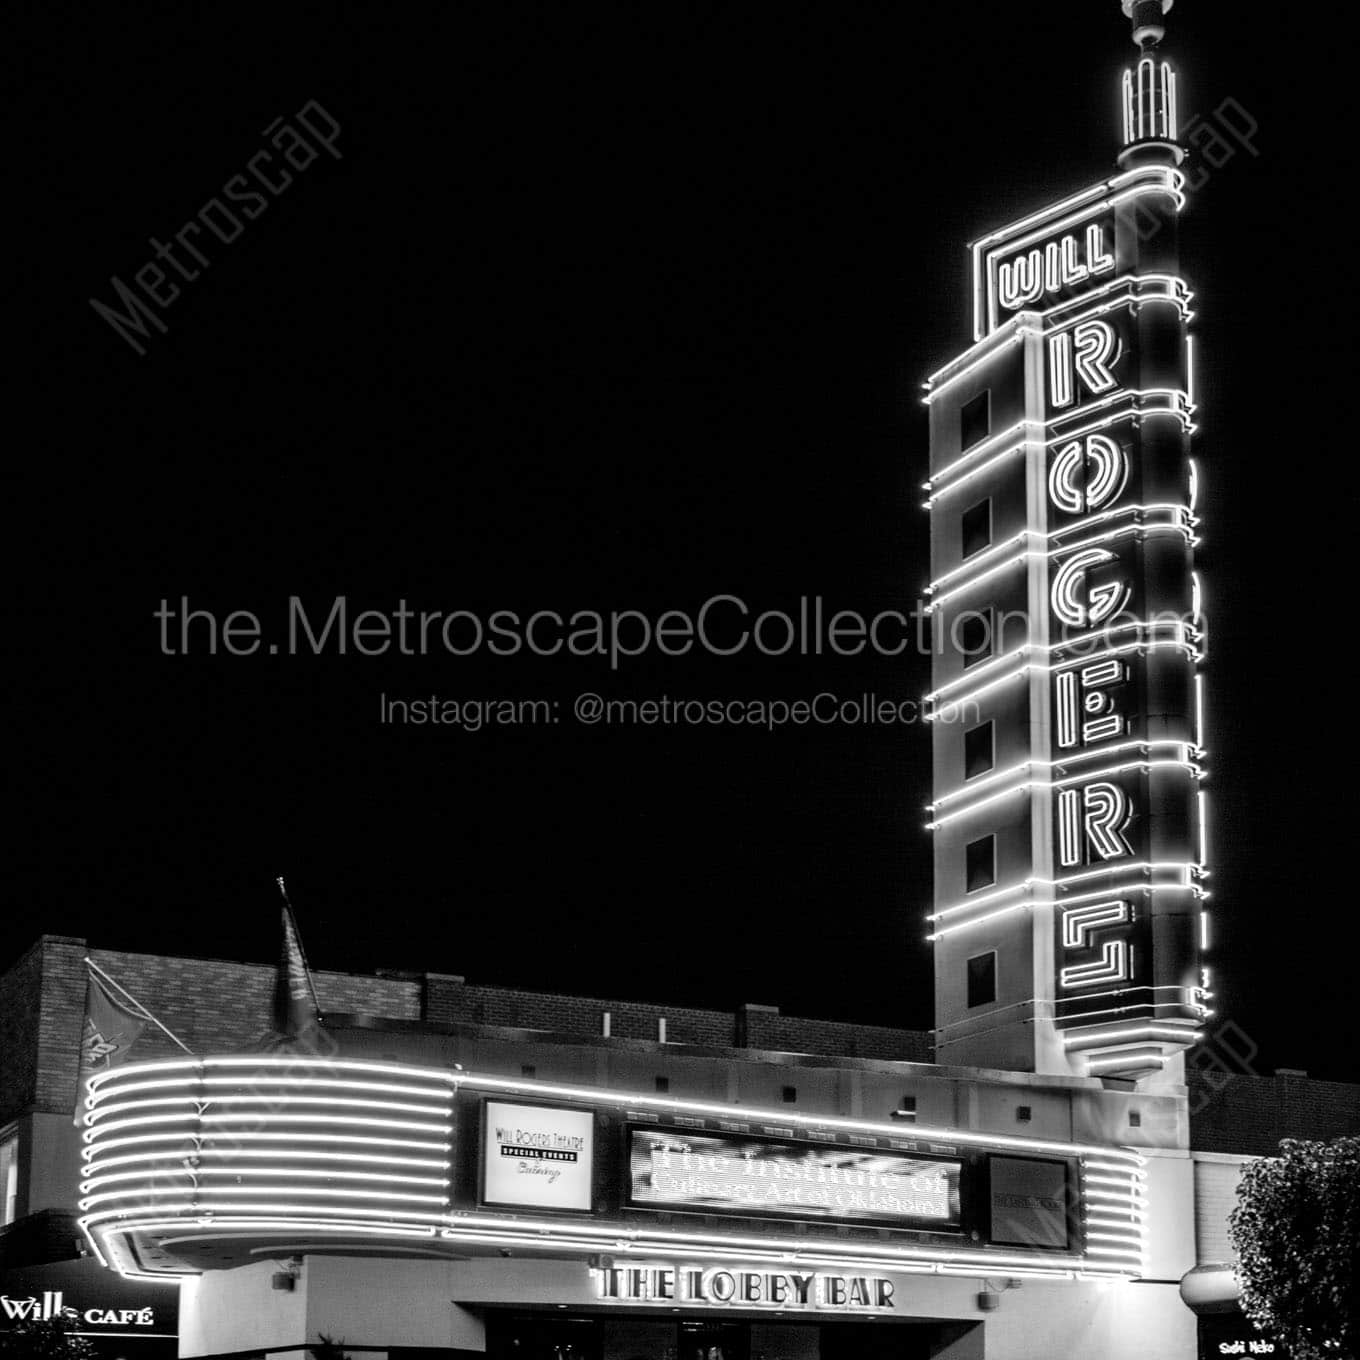 will rogers theater at night Black & White Wall Art